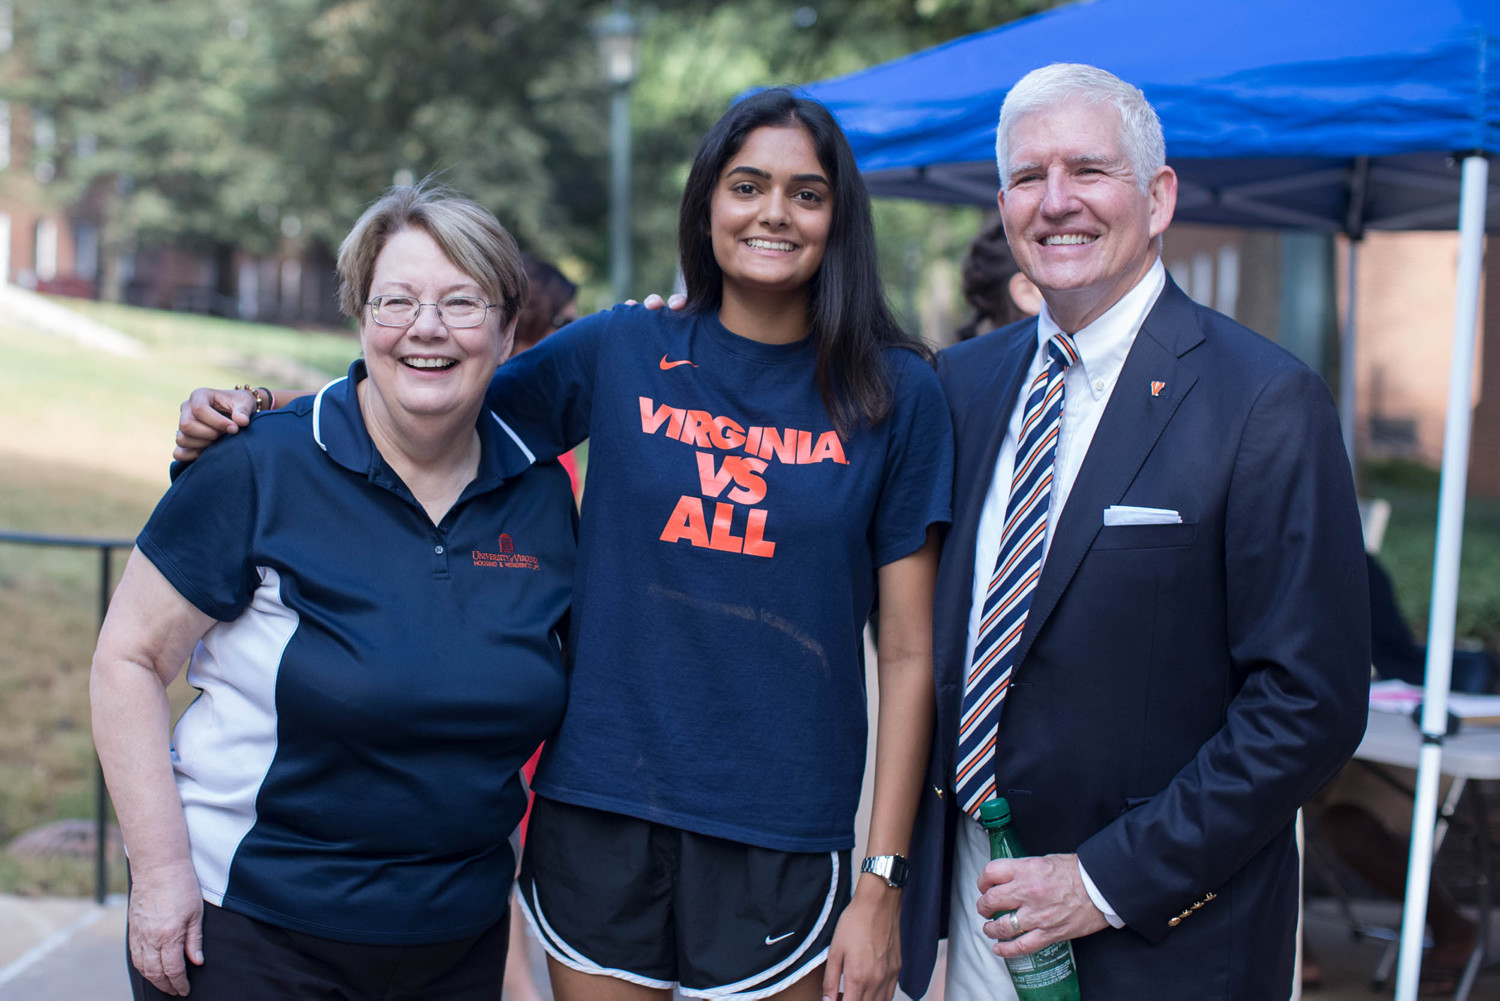 UVA Dean of Students Allen Groves and President Teresa A. Sullivan greeted students and their families as they arrived on Grounds to move into their residence halls.